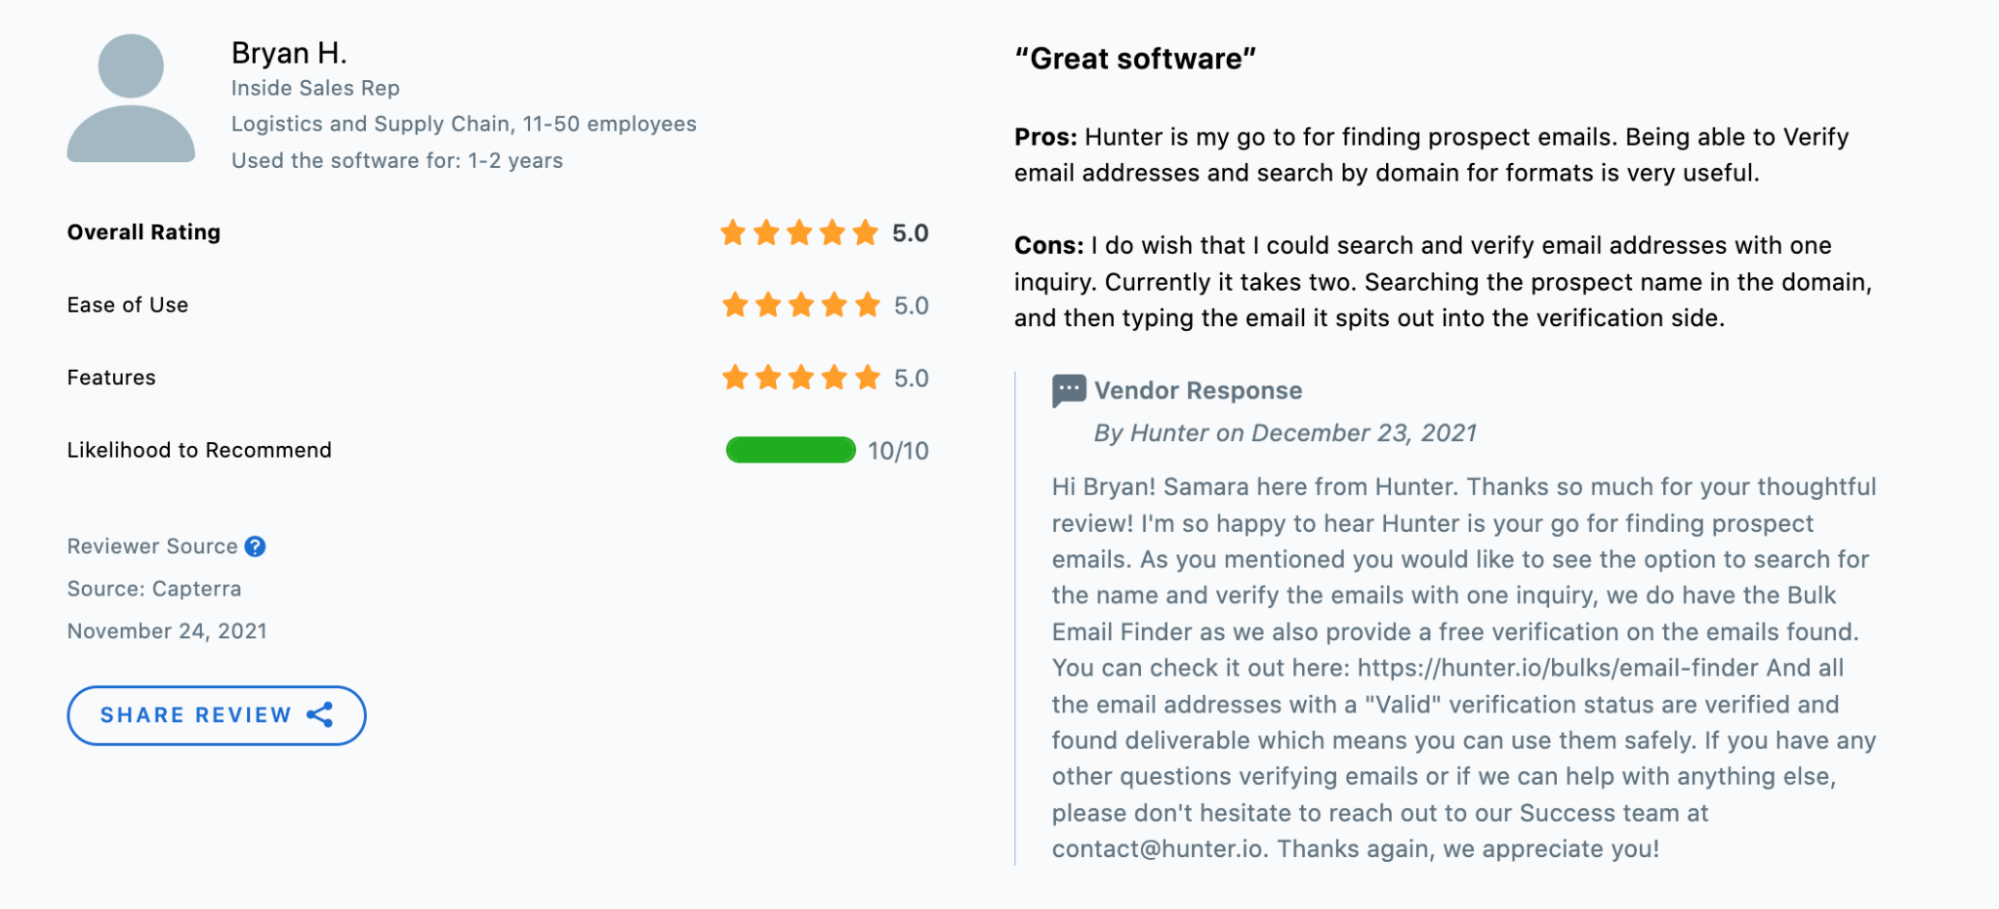 Addressing feedback from reviews